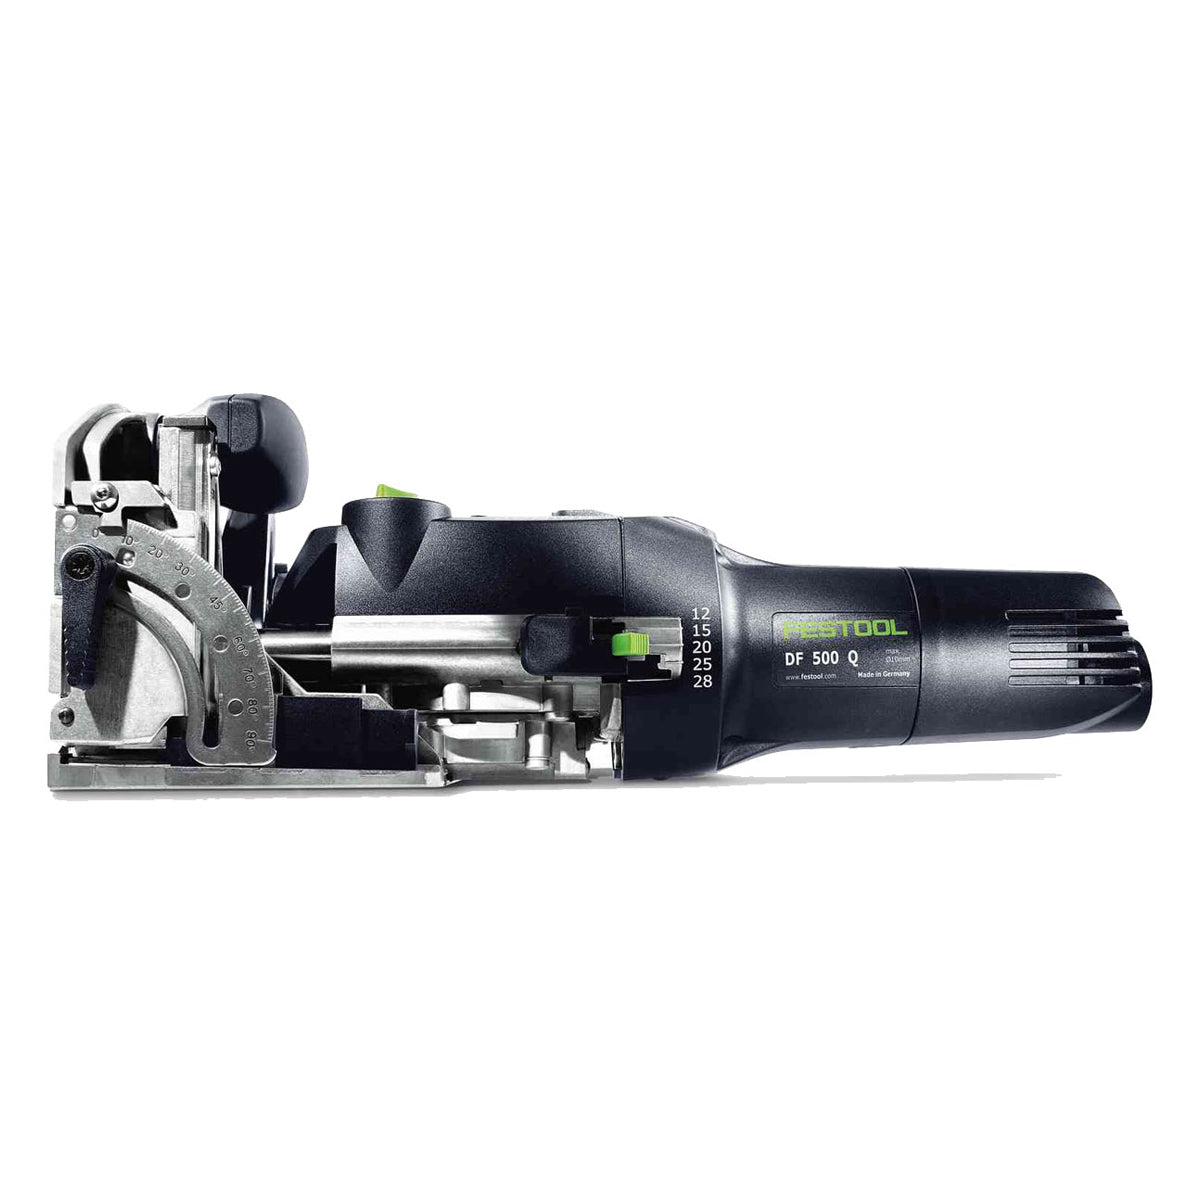 Festool DF 500 Q-Plus 230V GB Domino Joining Machine In Systainer SYS3 M 187 - 576415